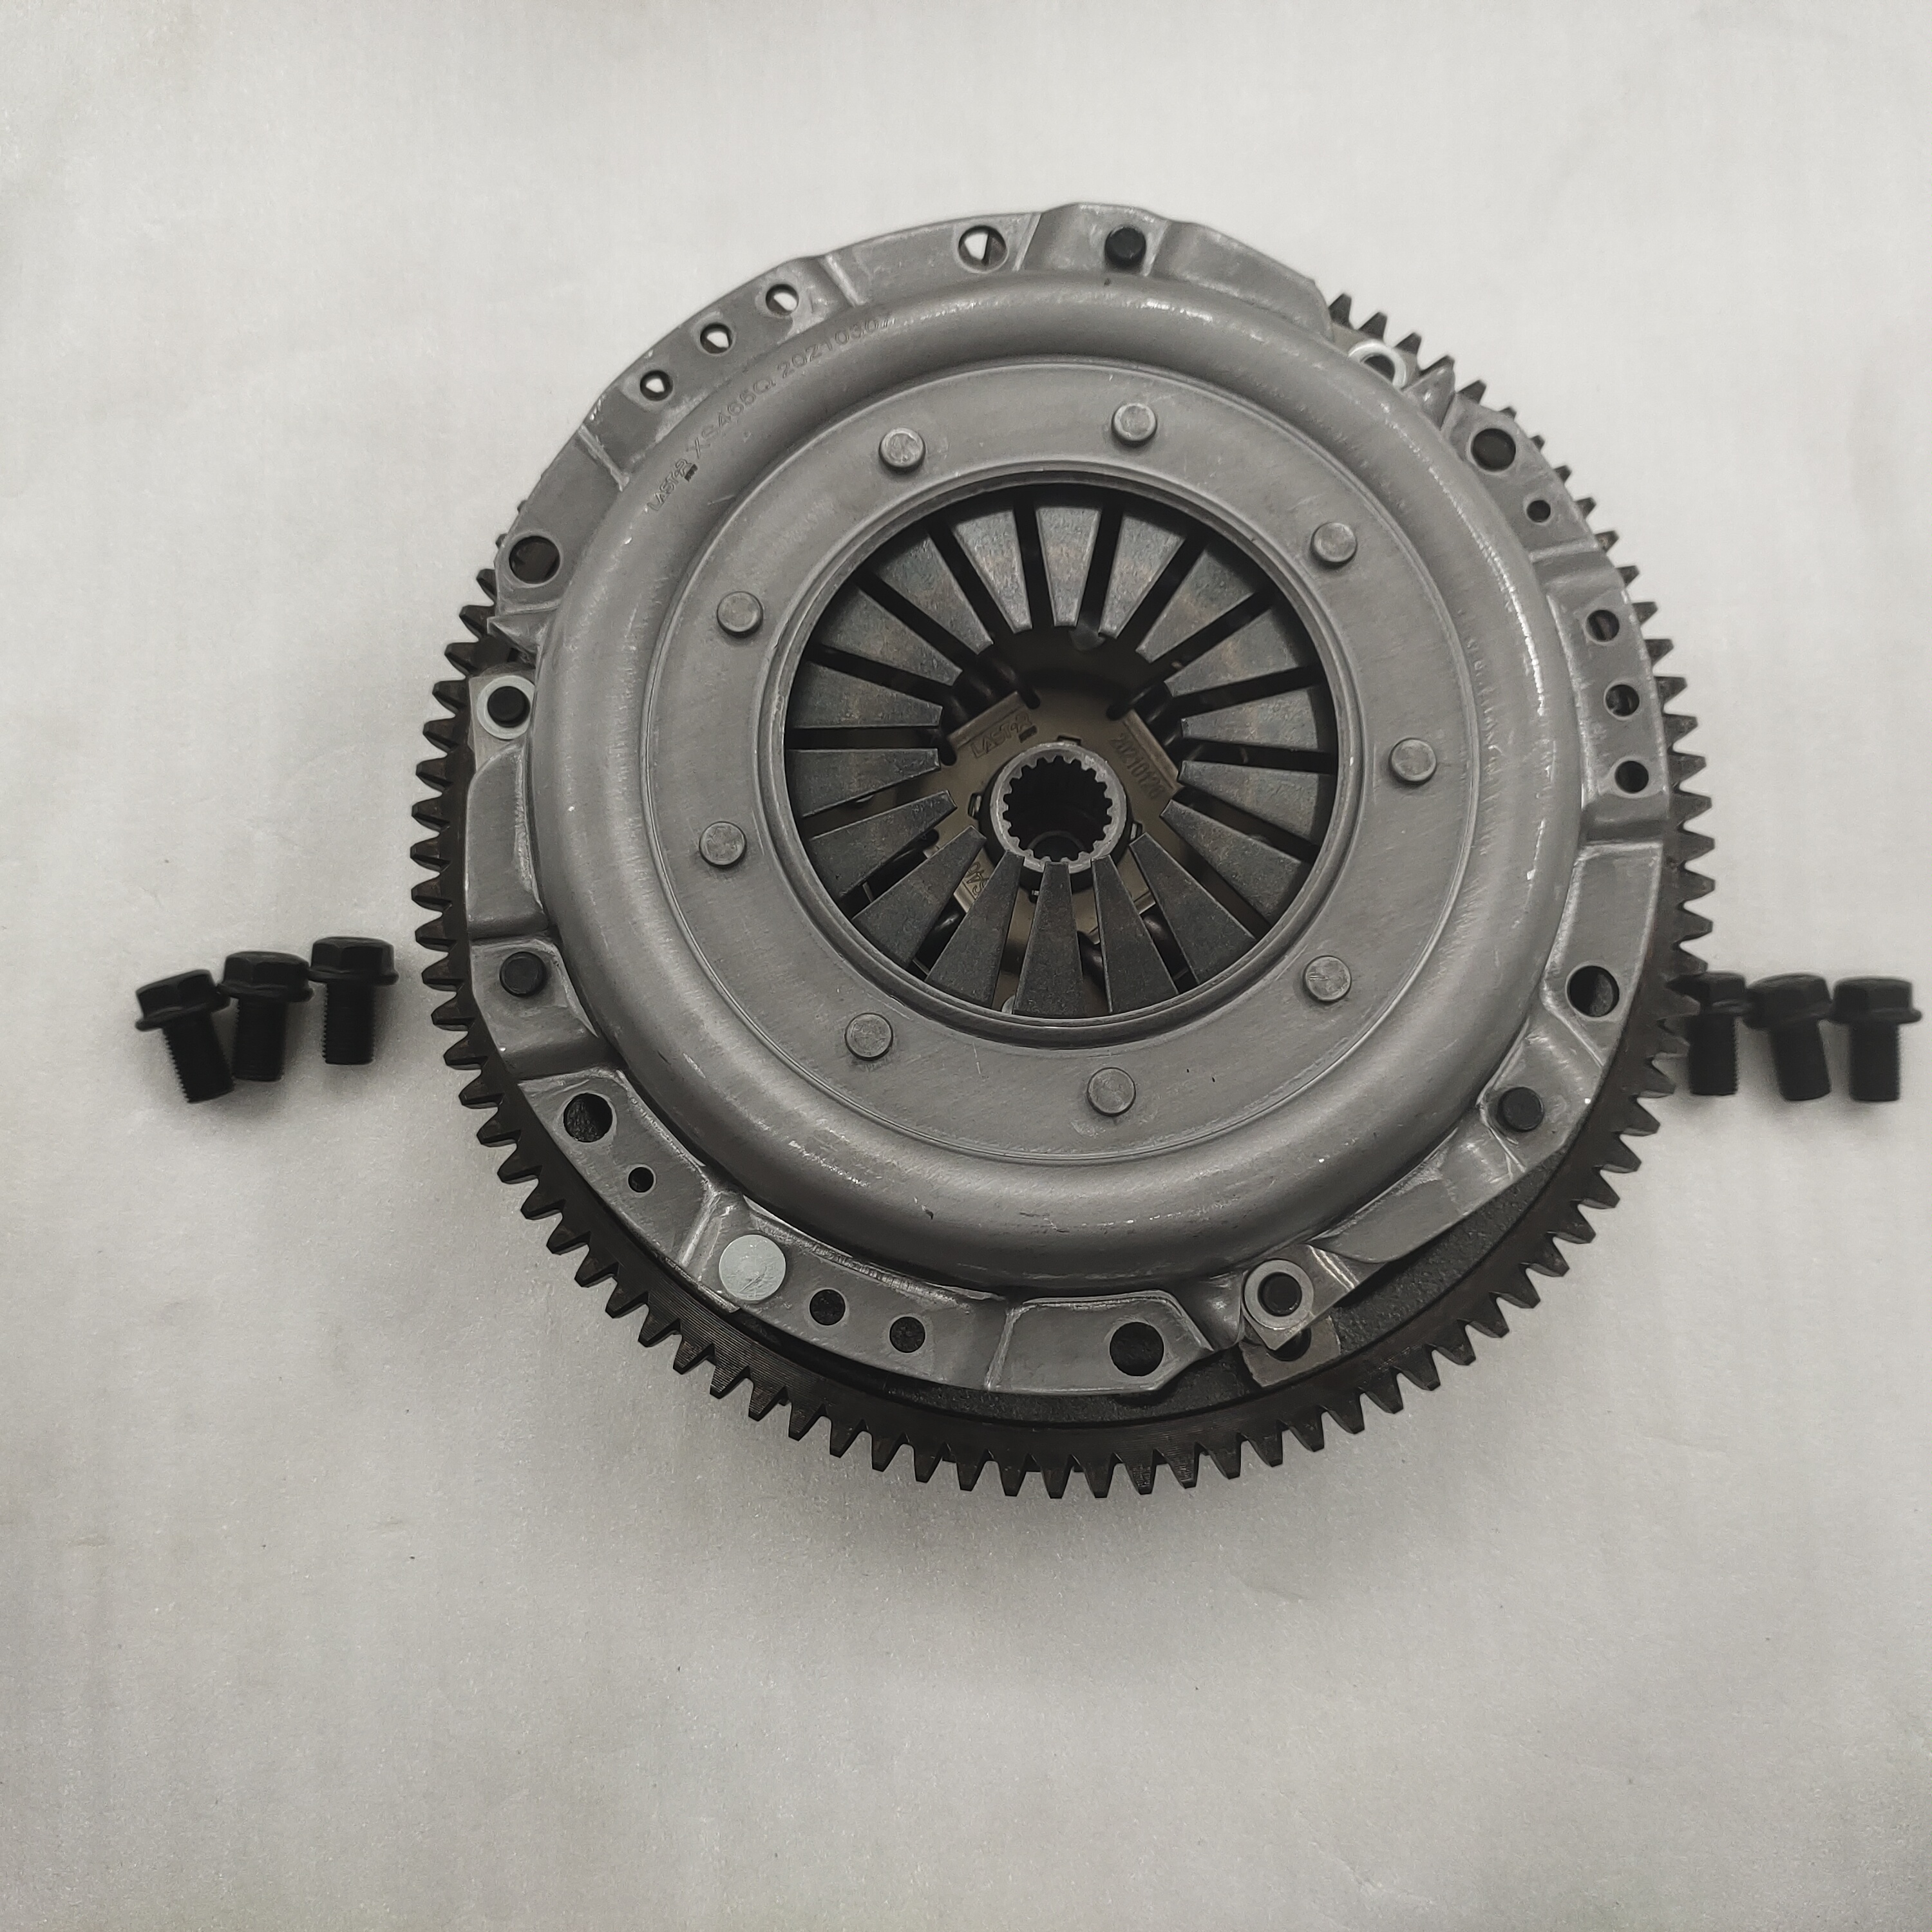 motorcycle 800cc engine Auto engine Genuine  Flywheel clutch Kit assembly tricycle engine parts high quality factory direct sale